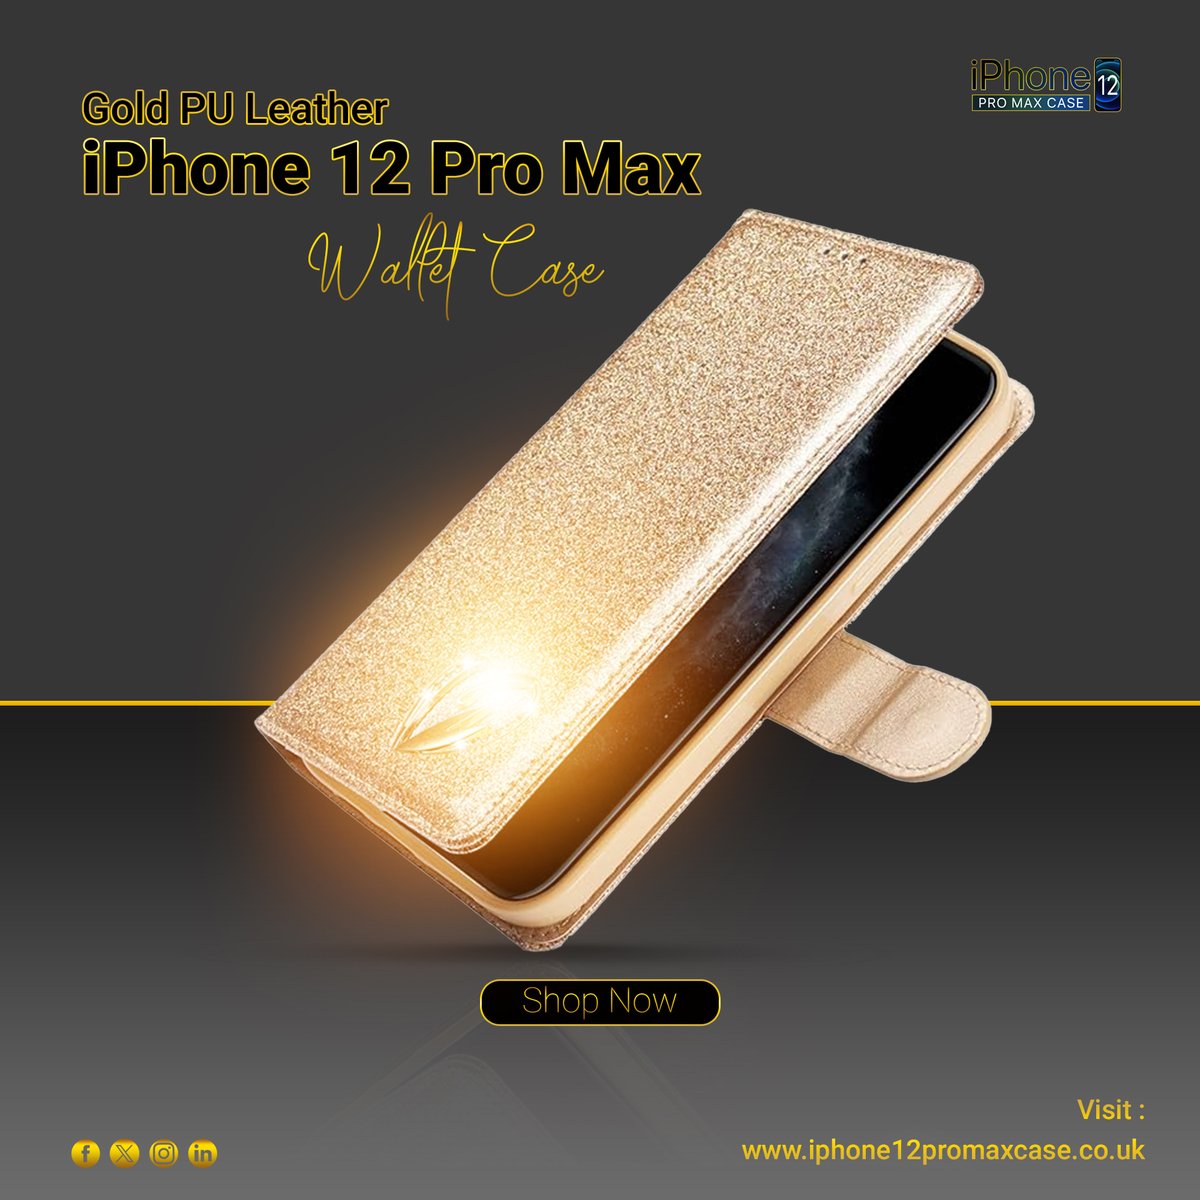 Glittering Gold PU Leather TPU Bumper Card Holder iPhone 12 Pro Max Wallet Case

amzn.to/3Y6SxQF

#iPhone12ProMax #WoodenCase #MagSafe 🔥🌲
#iphone12case #iphone12procase #iphone12promaxcase #iphonecase #iphonecases #iphonecasesonline #iphonecaseshop #caseiphone